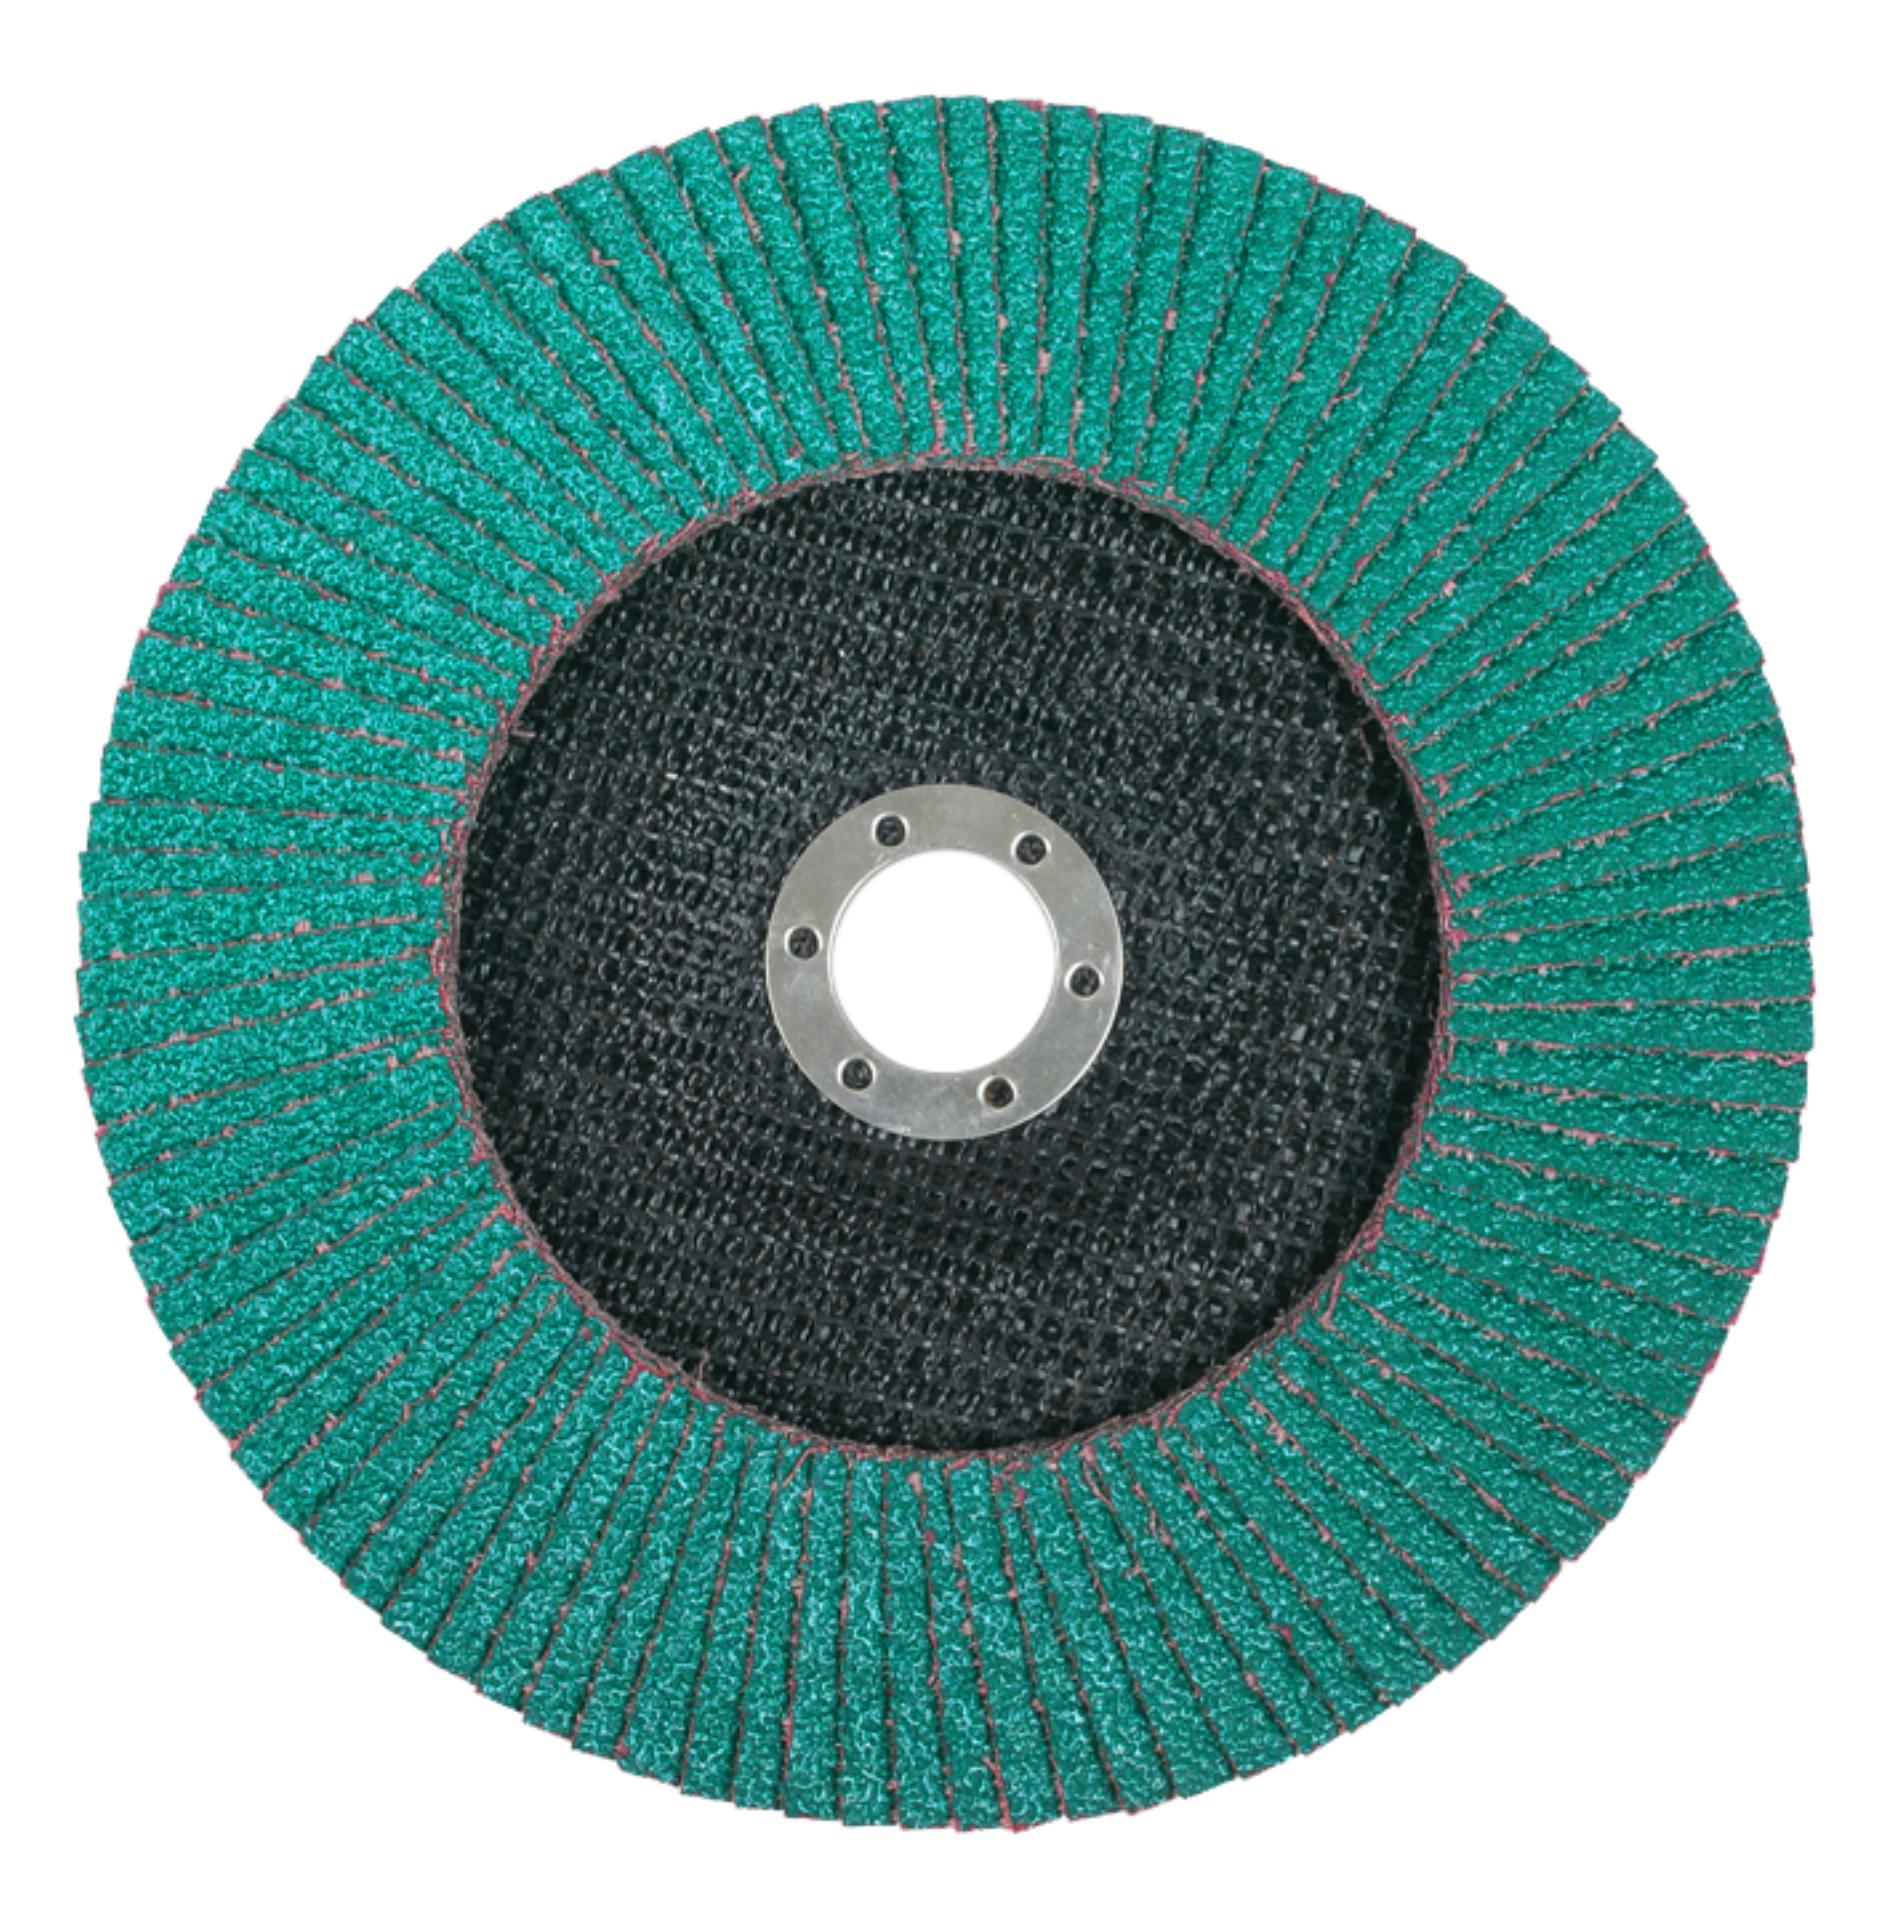 00051141428819 Standard Abrasives™ Zirconia HP Type 27 Flap Disc, 645939,  4-1/2 in x 5/8-11 60, 10 per case Aircraft products flap-discs 9369050